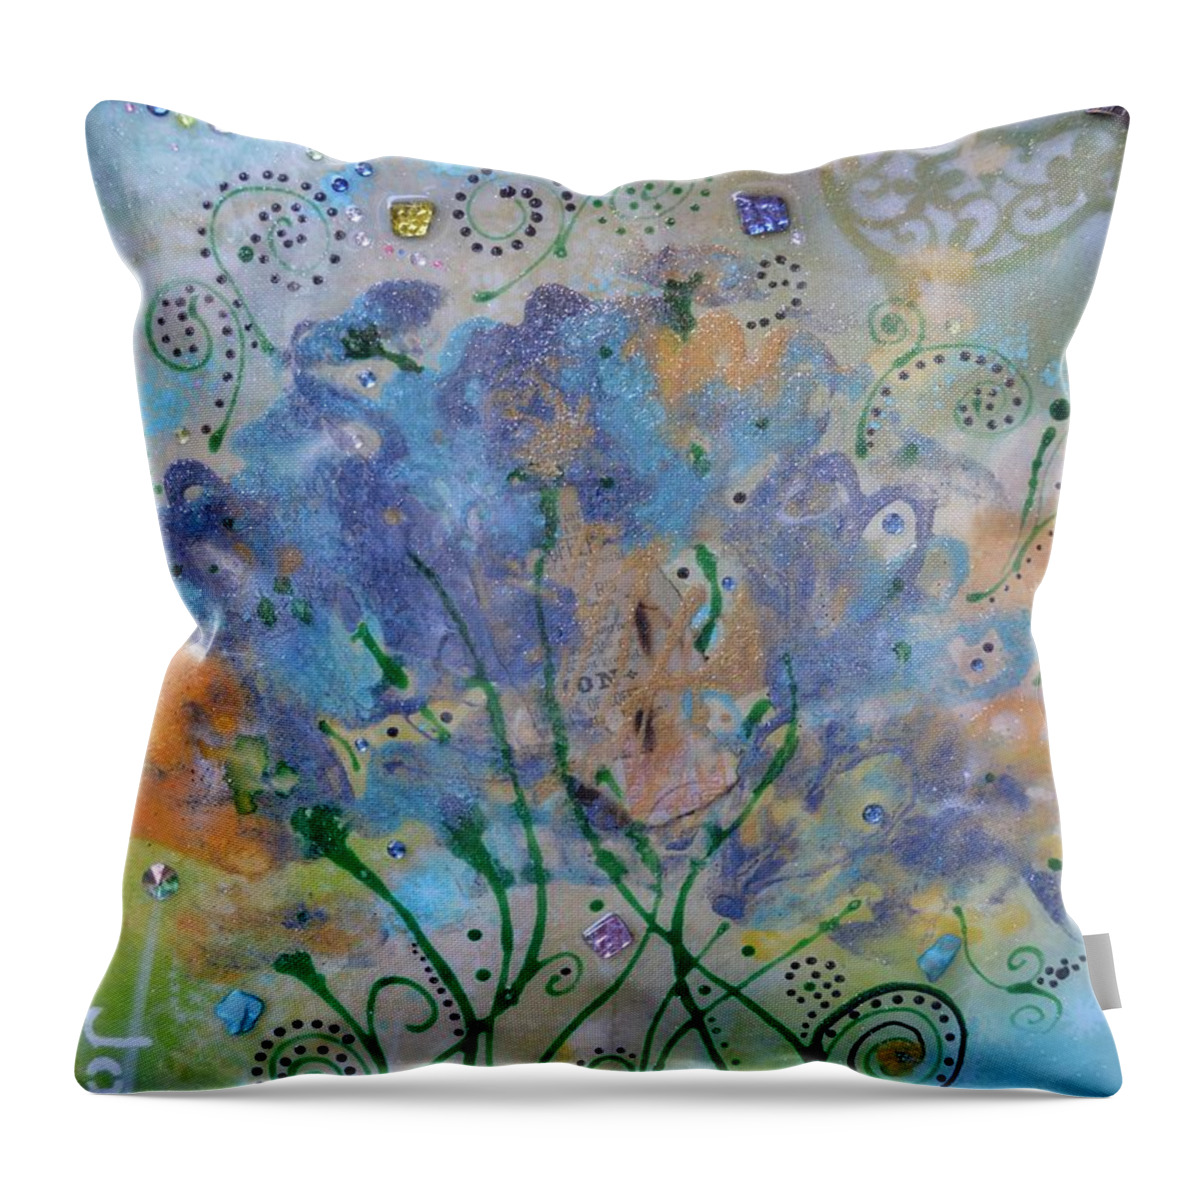 Floral Abstract Art Painting Throw Pillow featuring the painting Joy by MiMi Stirn by MiMi Stirn